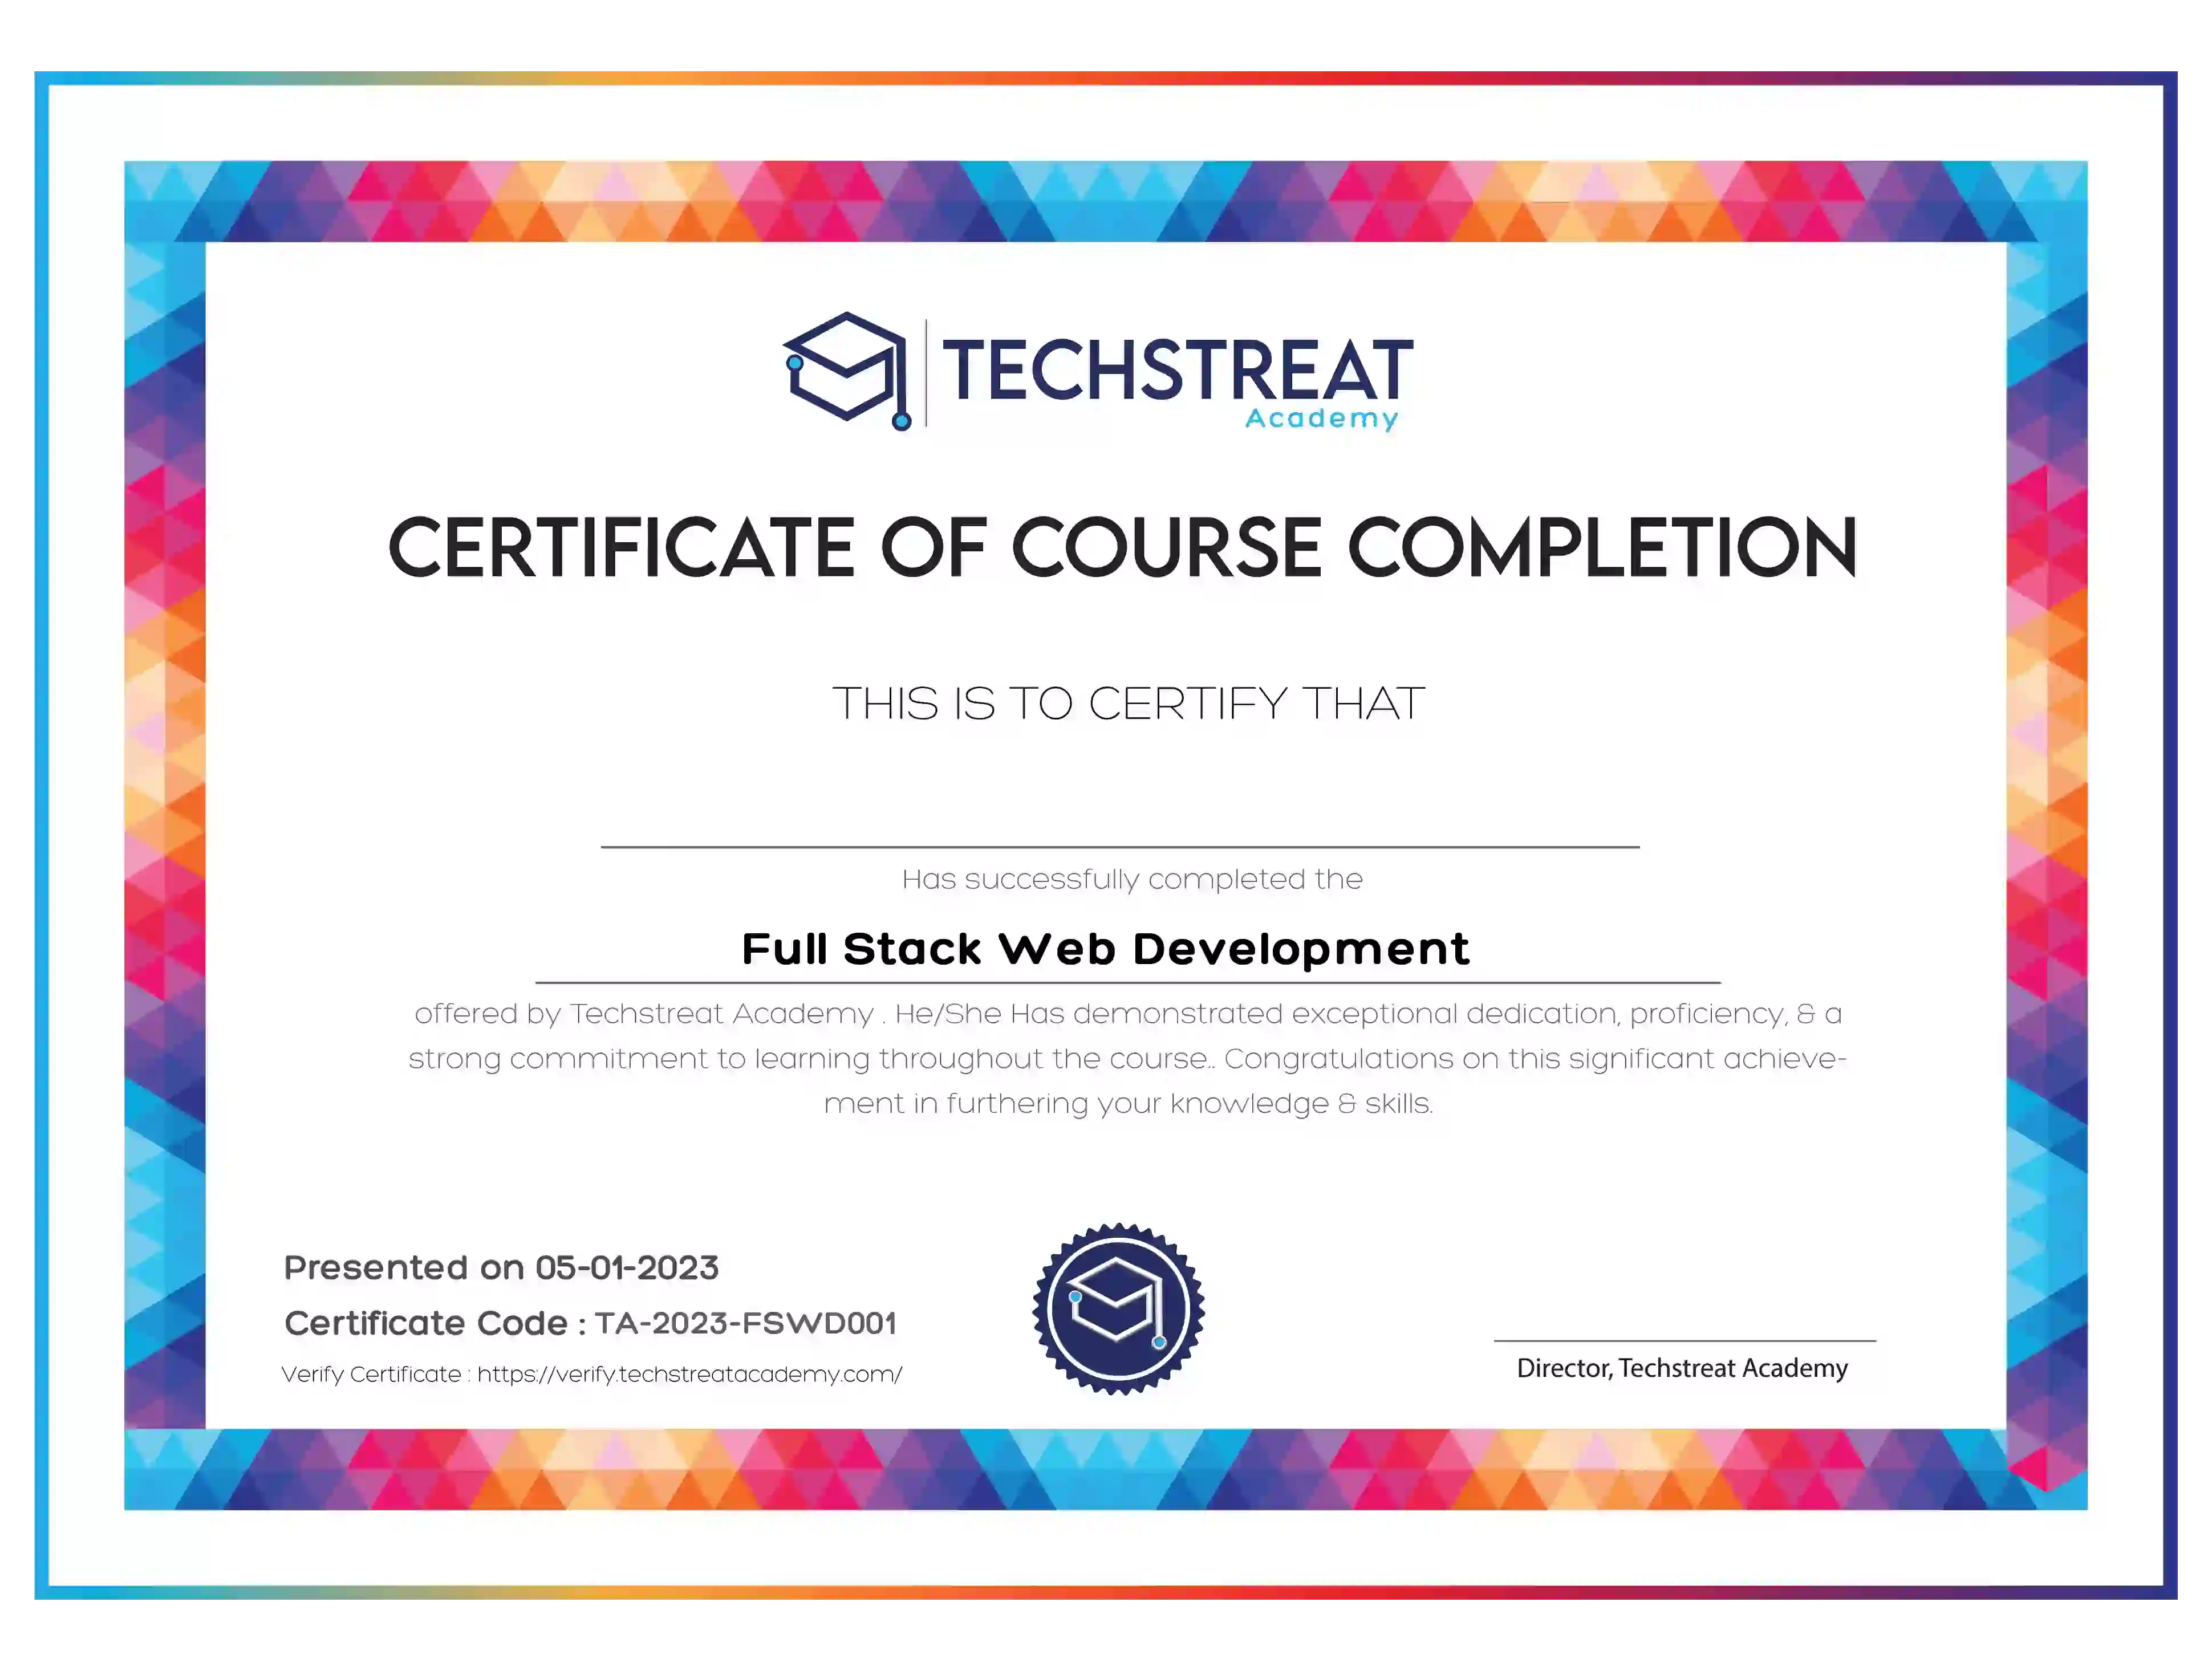 A certificate of completion for a web course.